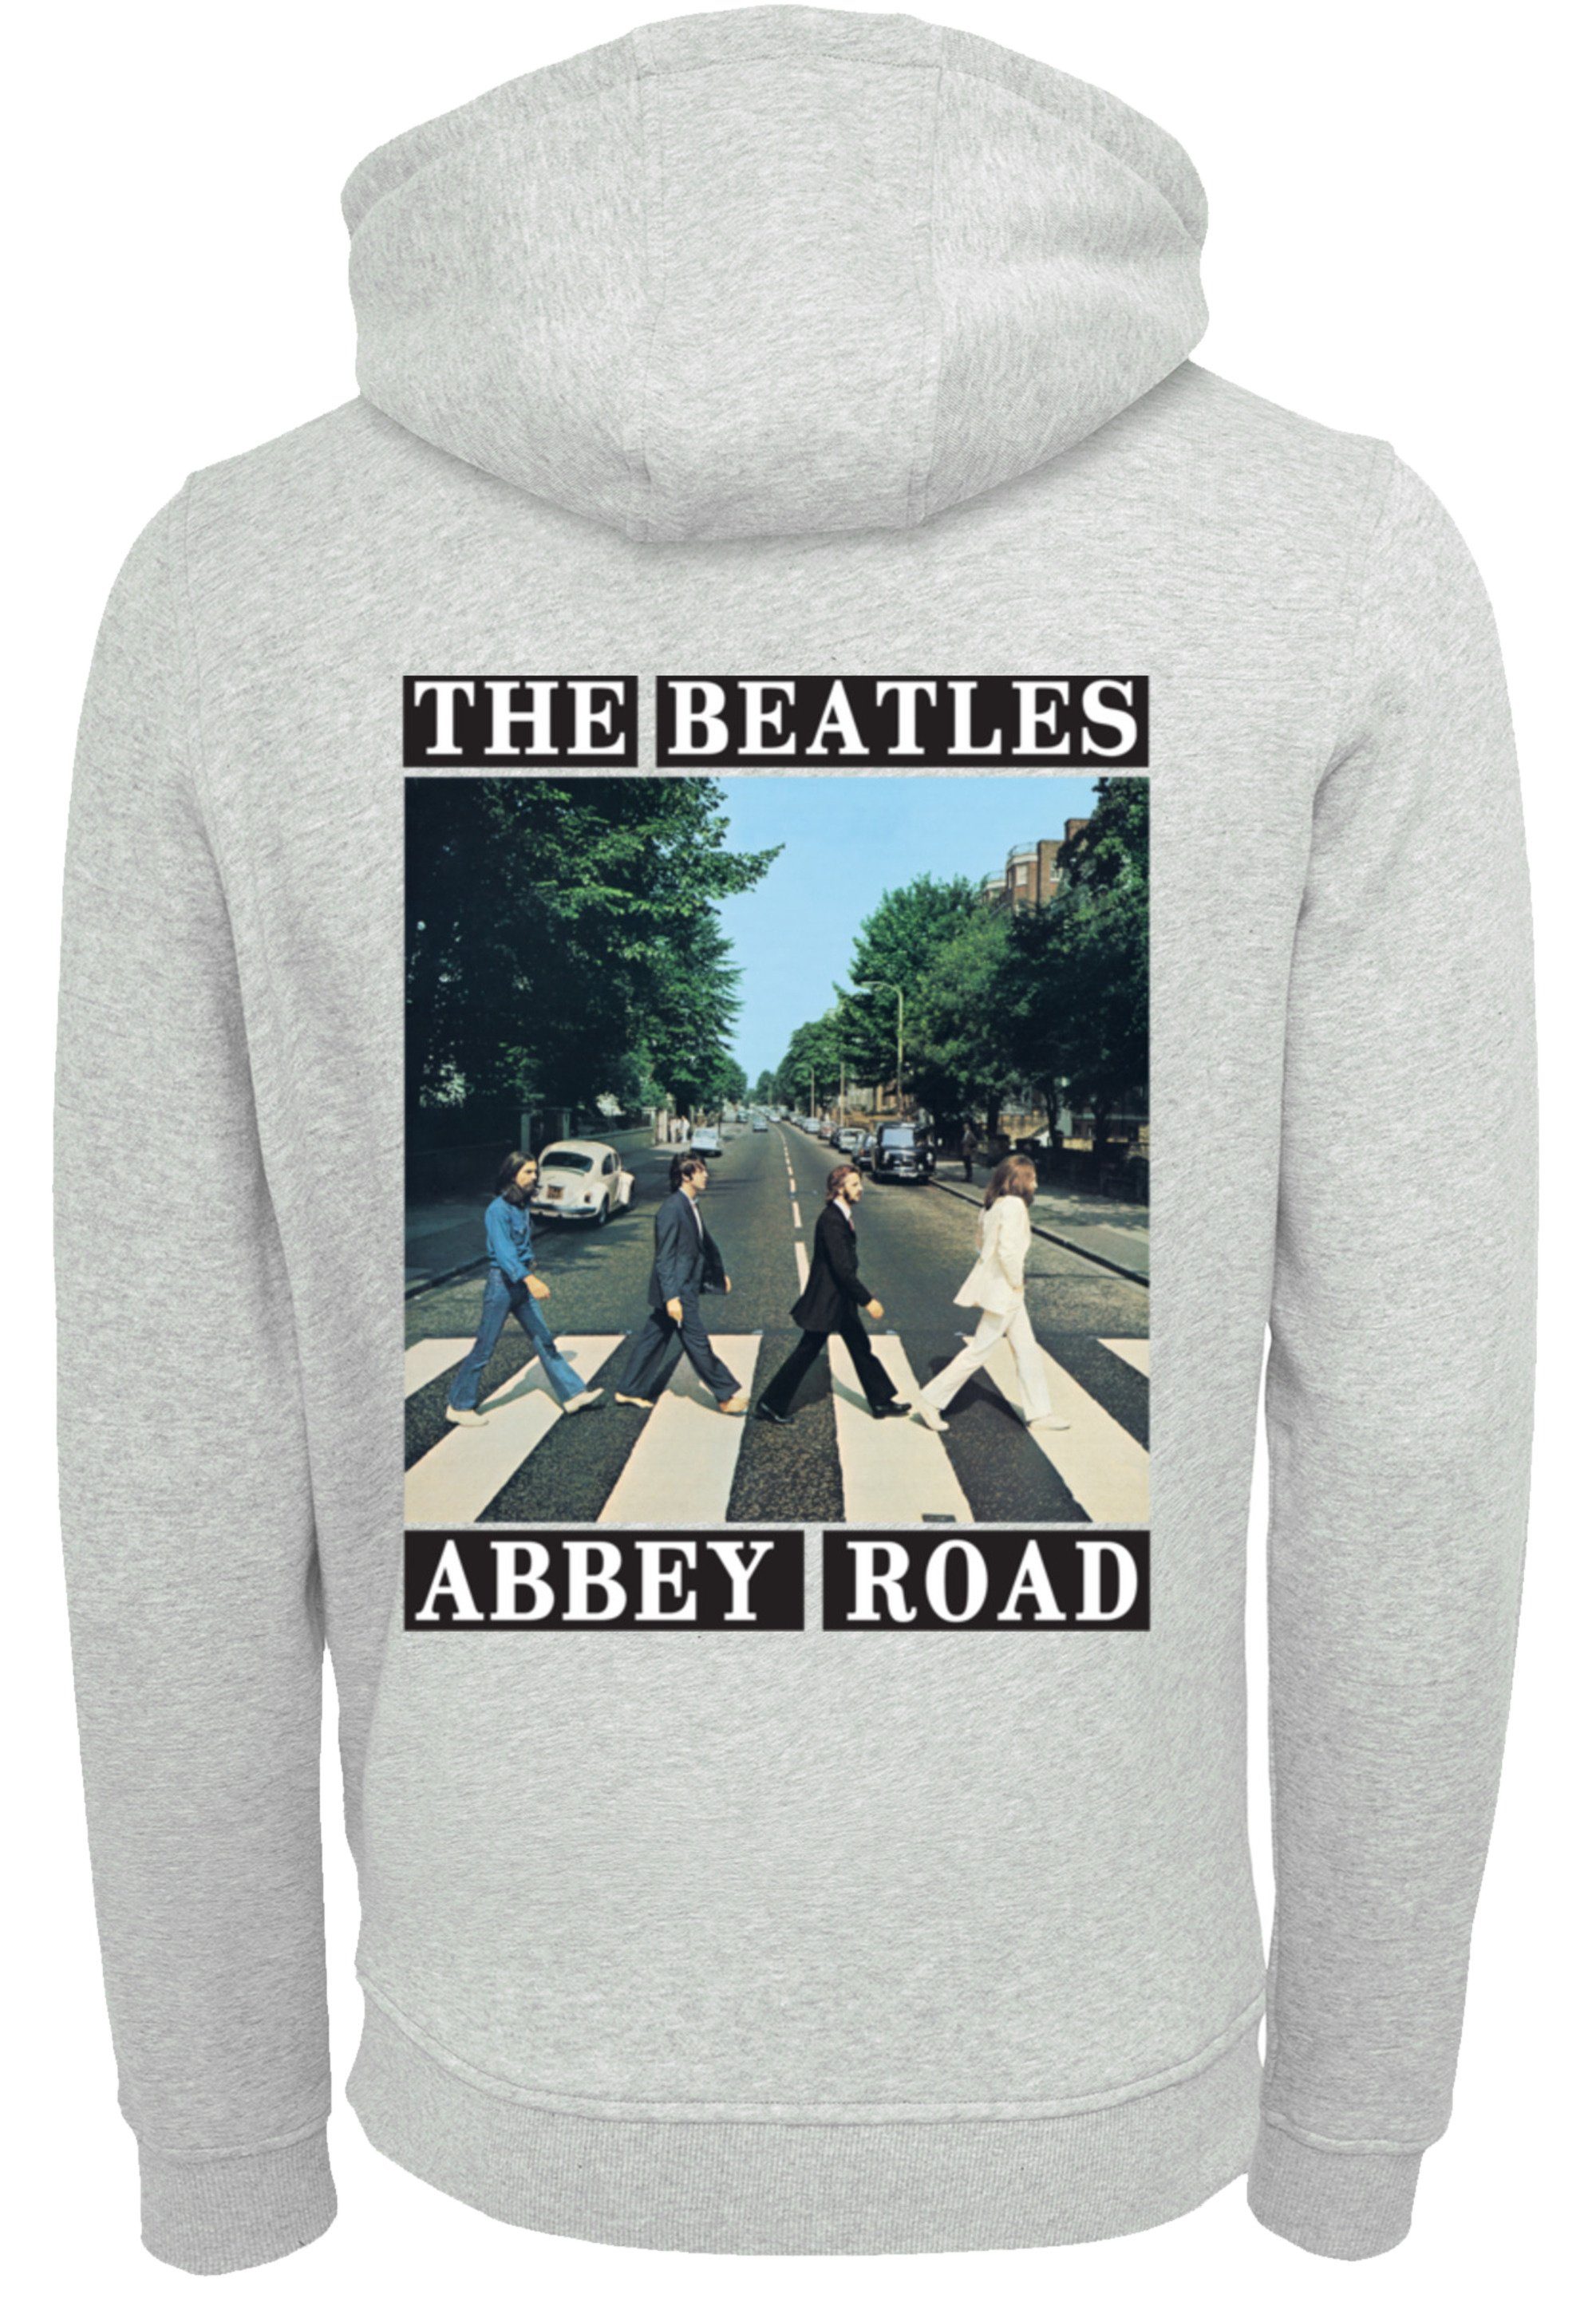 F4NT4STIC Kapuzenpullover The Beatles Abbey Road Rock Musik Band Hoodie, Warm, Bequem heather grey